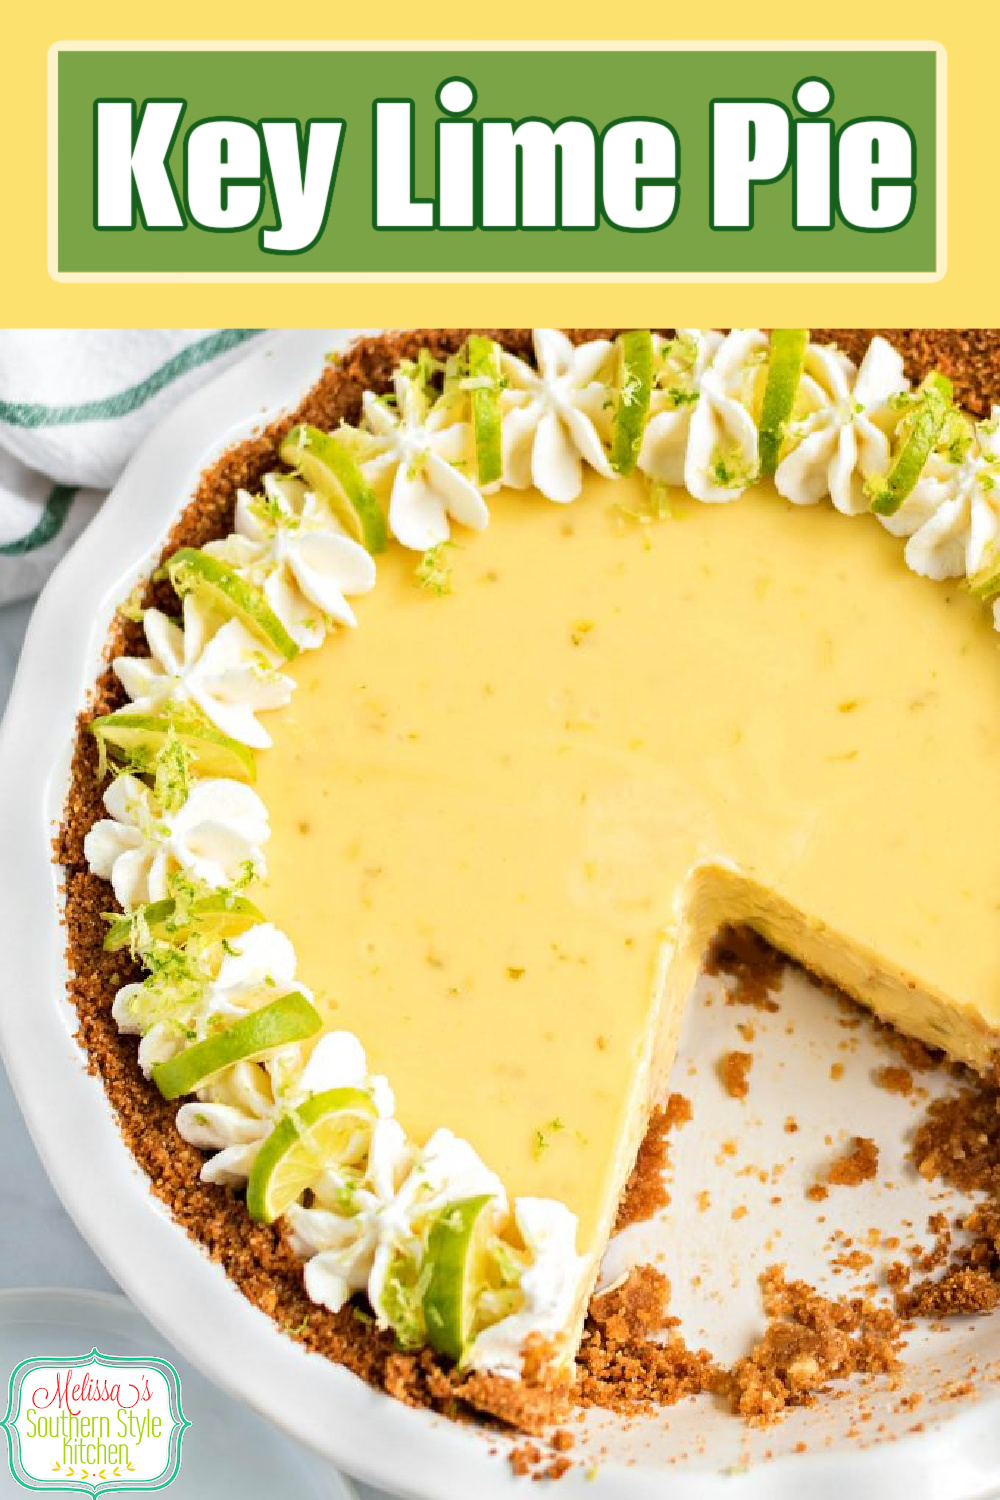 There's a burst of lime in every bite of this Key Lime Pie #keylimepie #keylimes #pierecipes #summerdesserts #holidaydesserts #dessertfoodrecipes #limepie #keylime #desserts #southernfood #southernrecipes